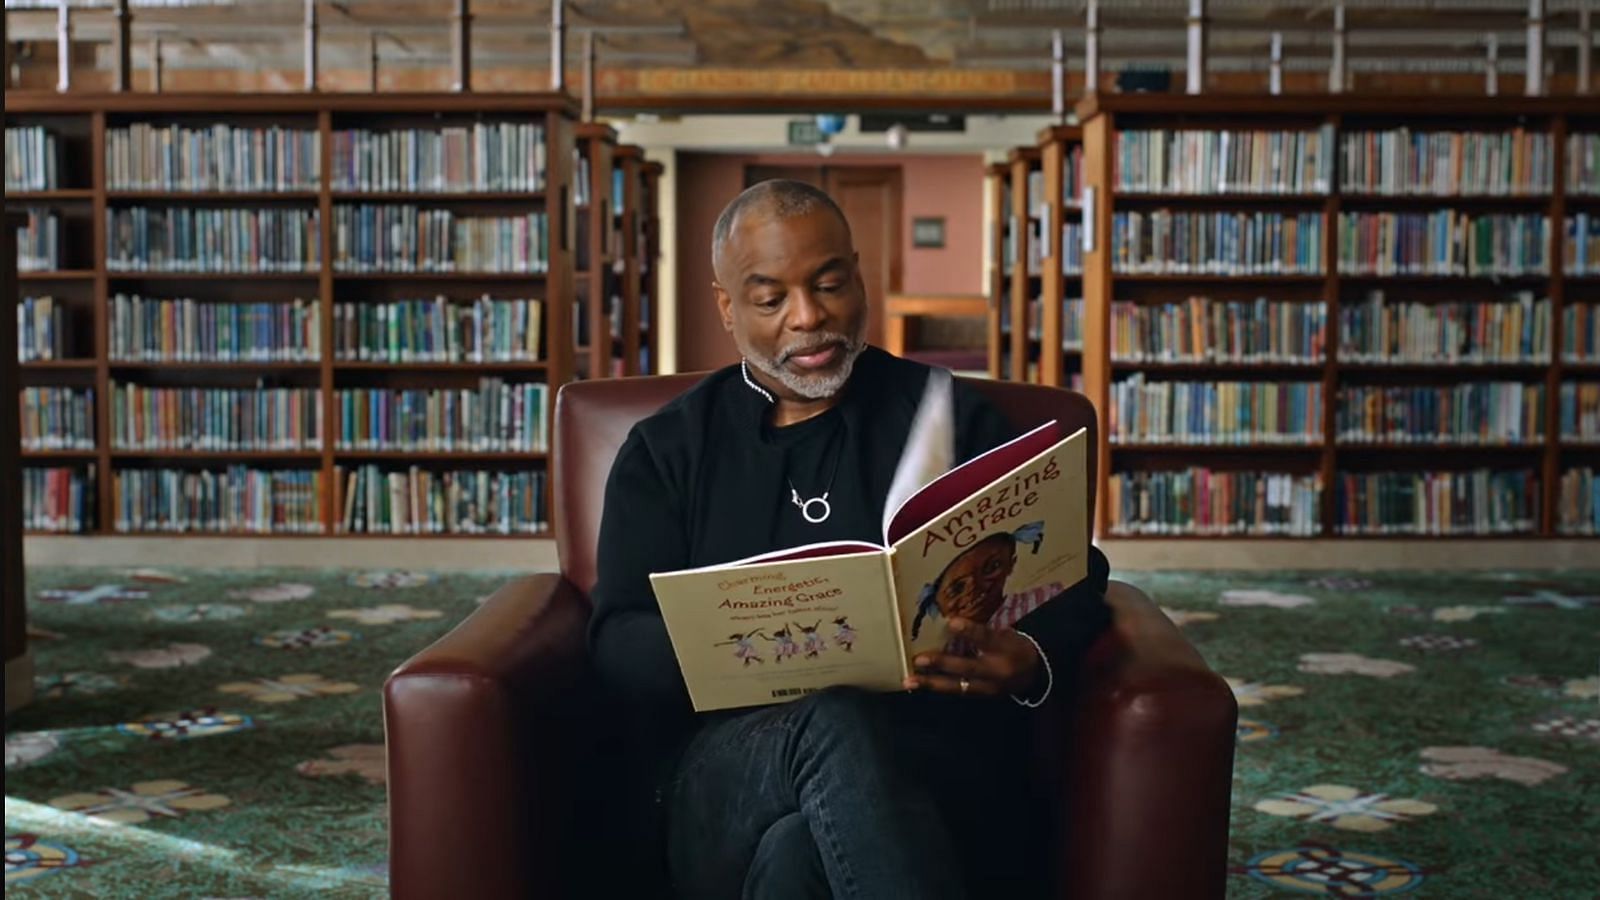 LeVar Burton is a part of this documentary (Image by Youtube/IGN)